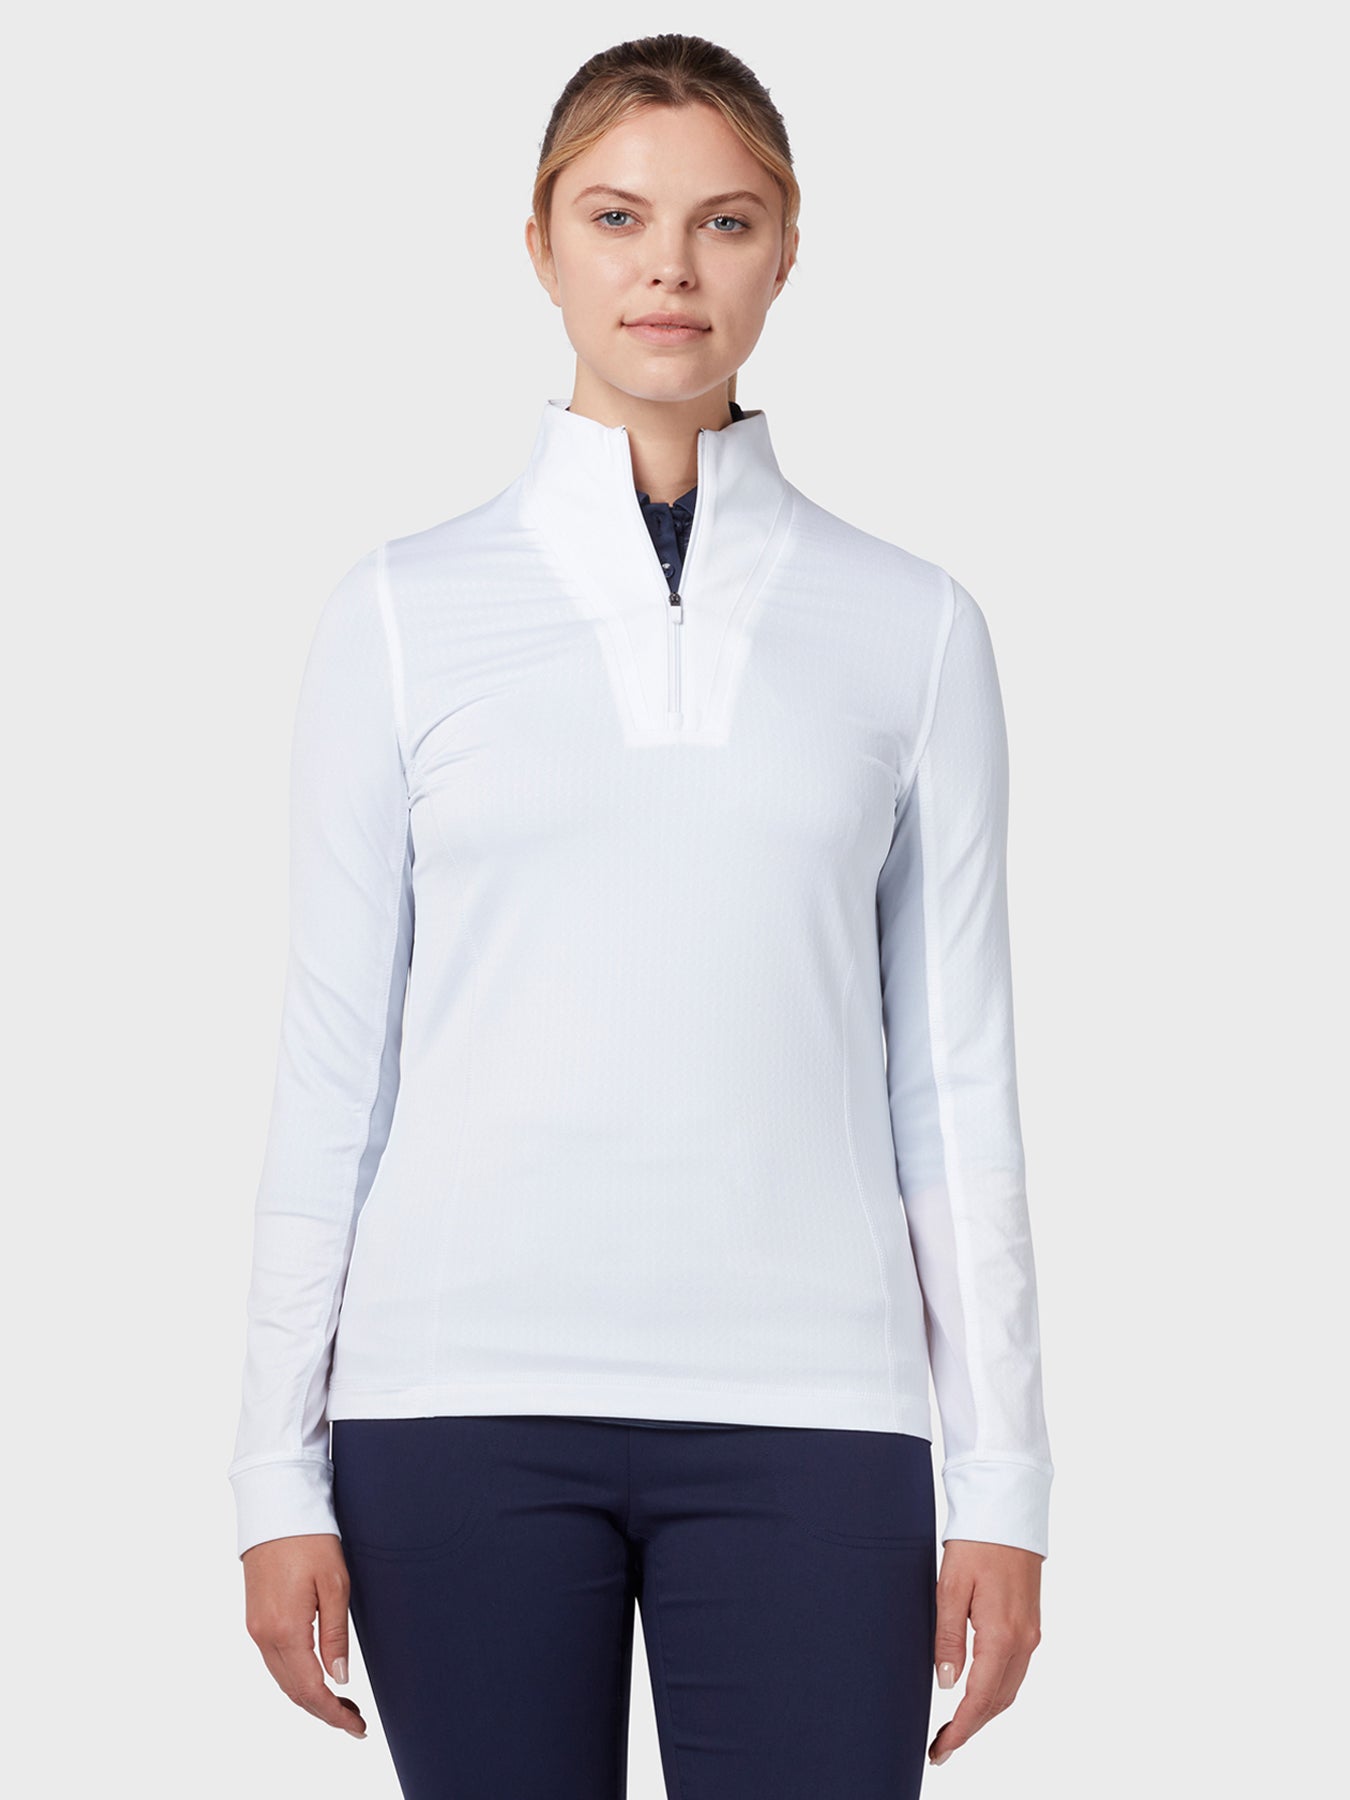 View 14 Zip Womens Chev Top In Brilliant White information